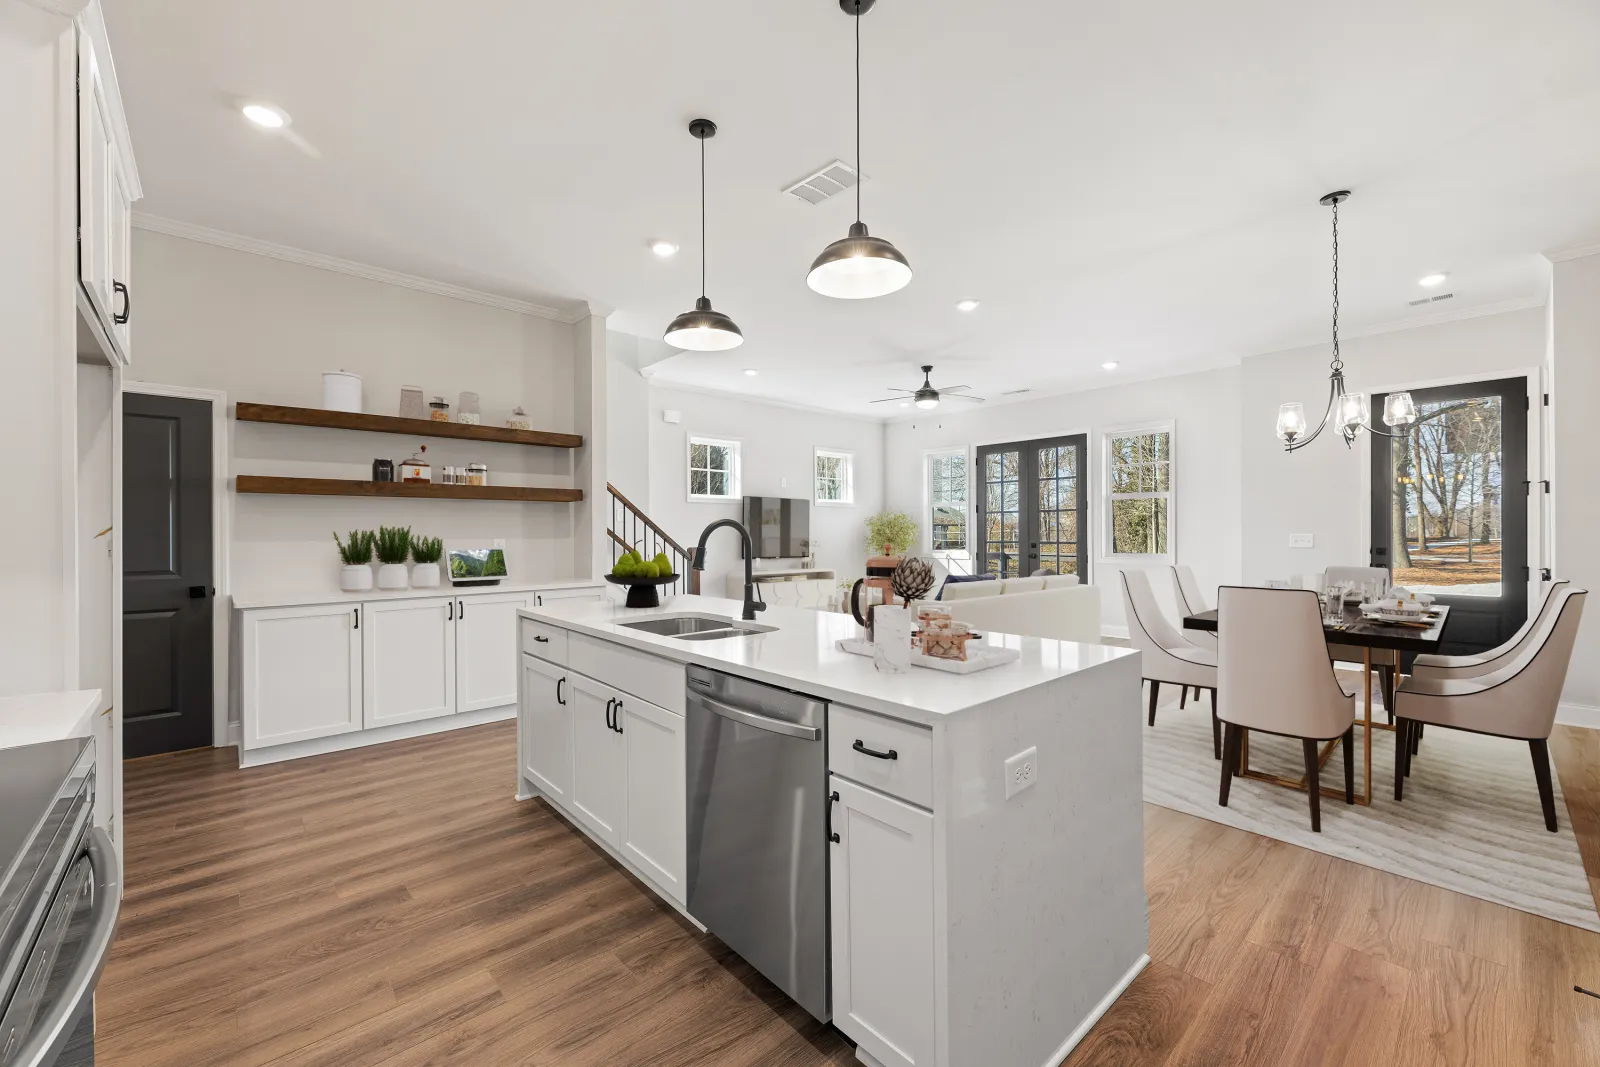 Serenity townhome model kitchen with white countertops and white cabinetry and view of dining room